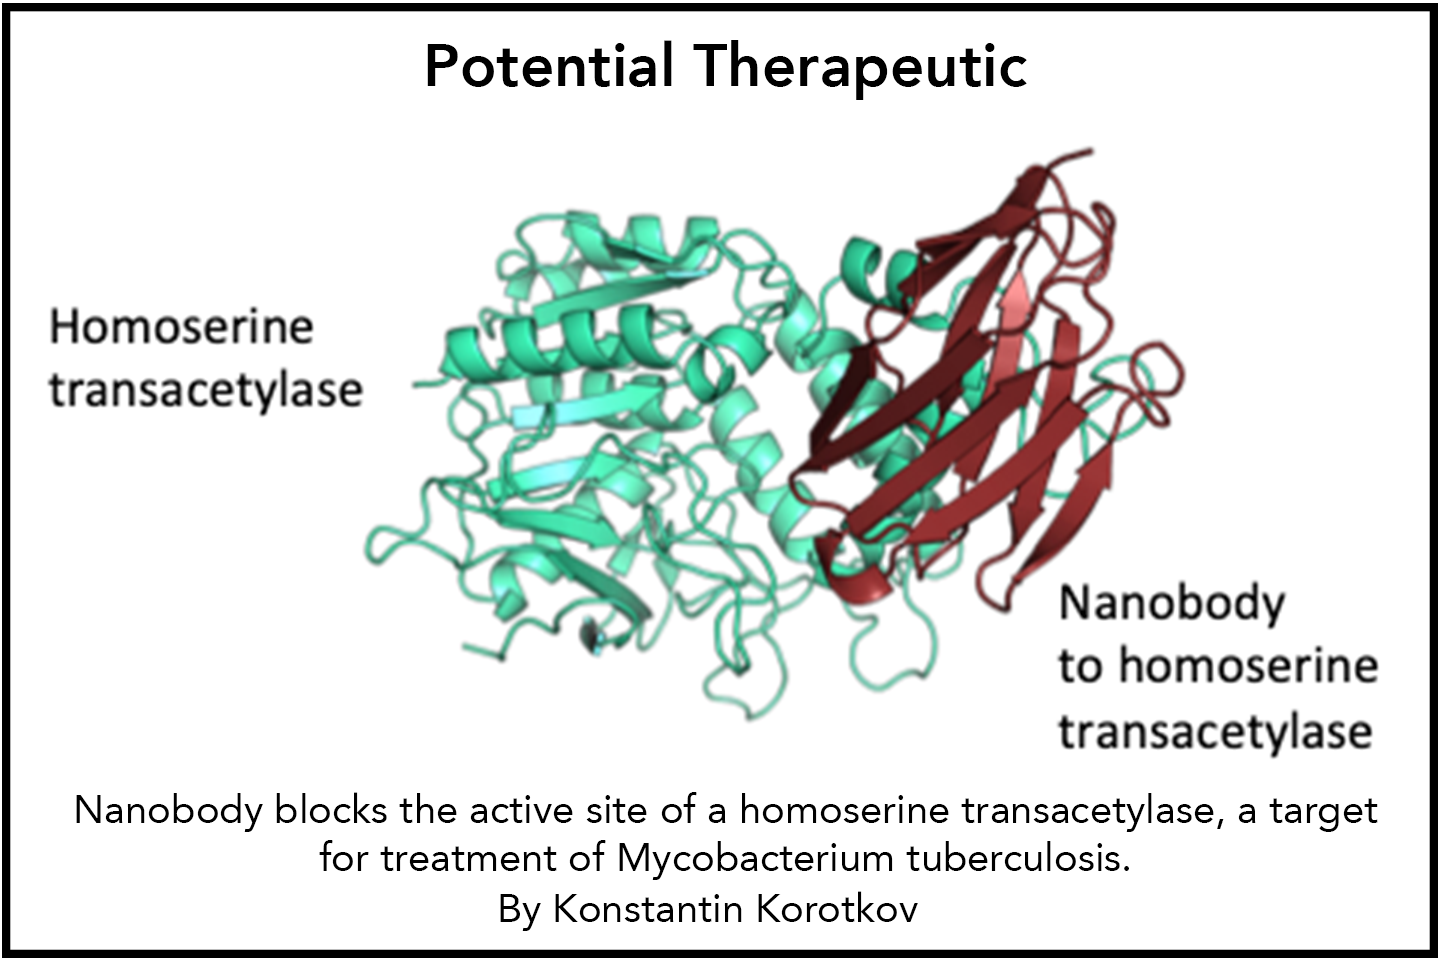 Potential Therapeutic: Nanobody blocks the active site of a homoserine transacetylase, a target for treatment of Mycobacterium tuberculosis.